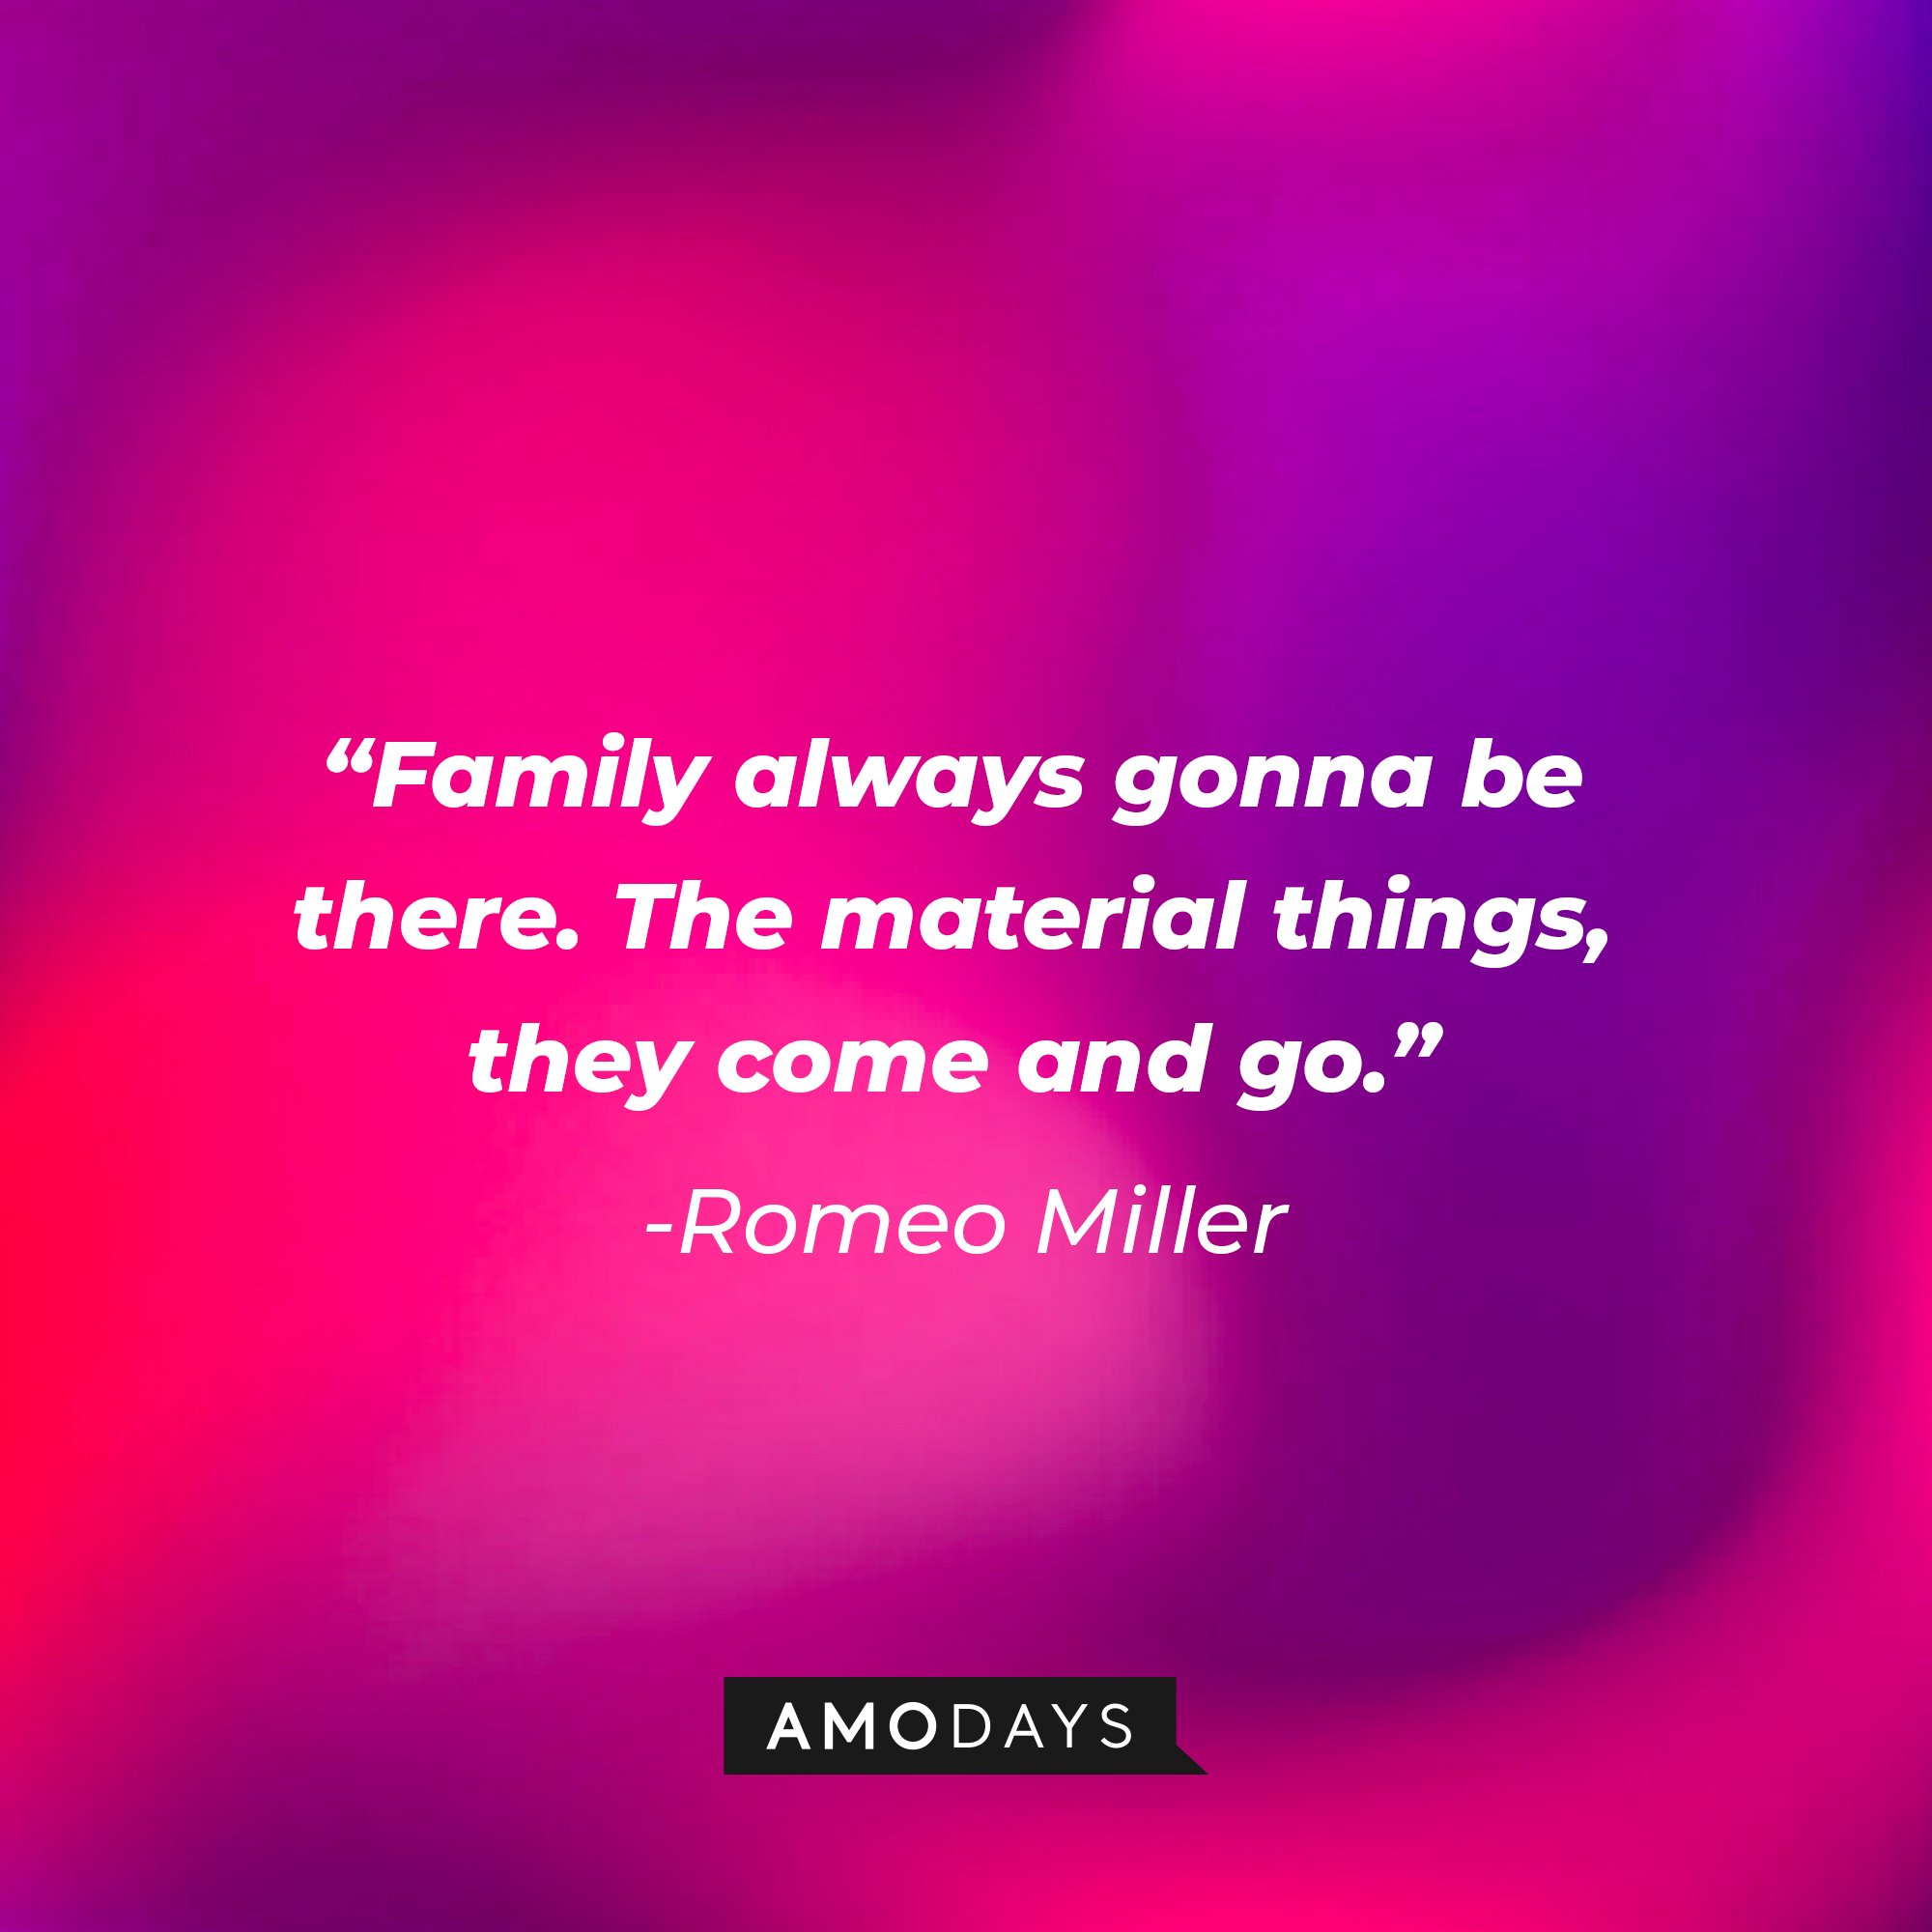 Romeo Miller’s quote: "Family always gonna be there. The material things, they come and go.” | Image: AmoDays